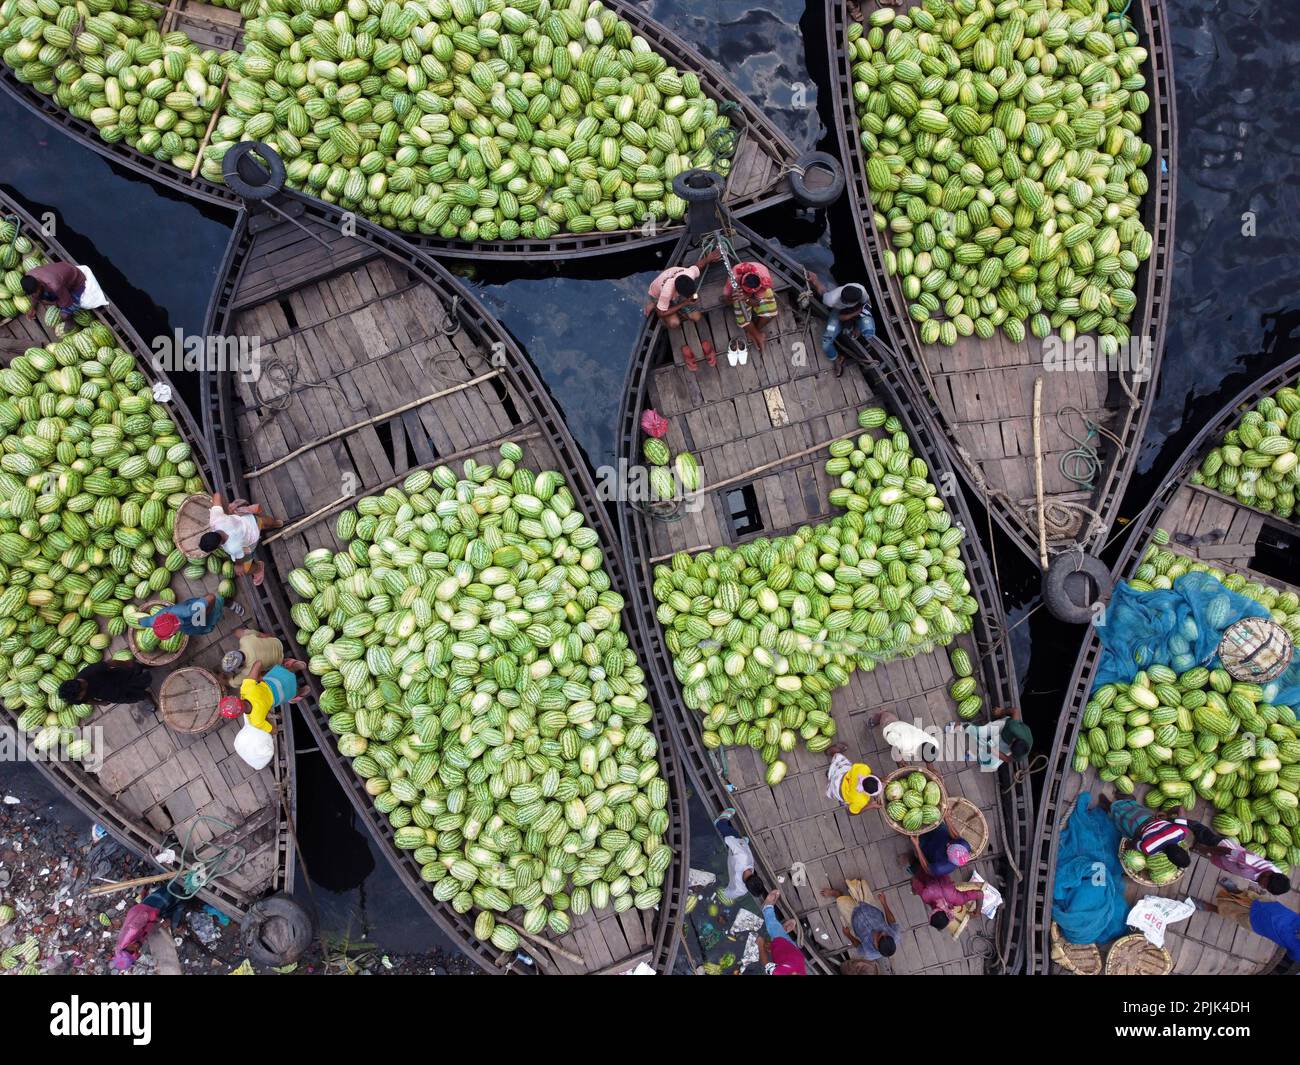 Dhaka, Dhaka, Bangladesh. 3rd Apr, 2023. Dozens of boats, carrying thousands of bright green watermelons, dock at a bustling market near the Buriganga River in Dhaka, Bangladesh. Traders bring the fruits from rural agricultural river areas to the country's capital Dhaka for distribution across the country. The workers, who earn just 3.50 GBP per day, spend all day unloading heavy baskets of watermelons. Each watermelon is sold for less than 1 GBP. Full of health benefits, watermelons are now turning out to be a preferred ingredient for restaurants, and five-star hotels, and are used in salads Stock Photo